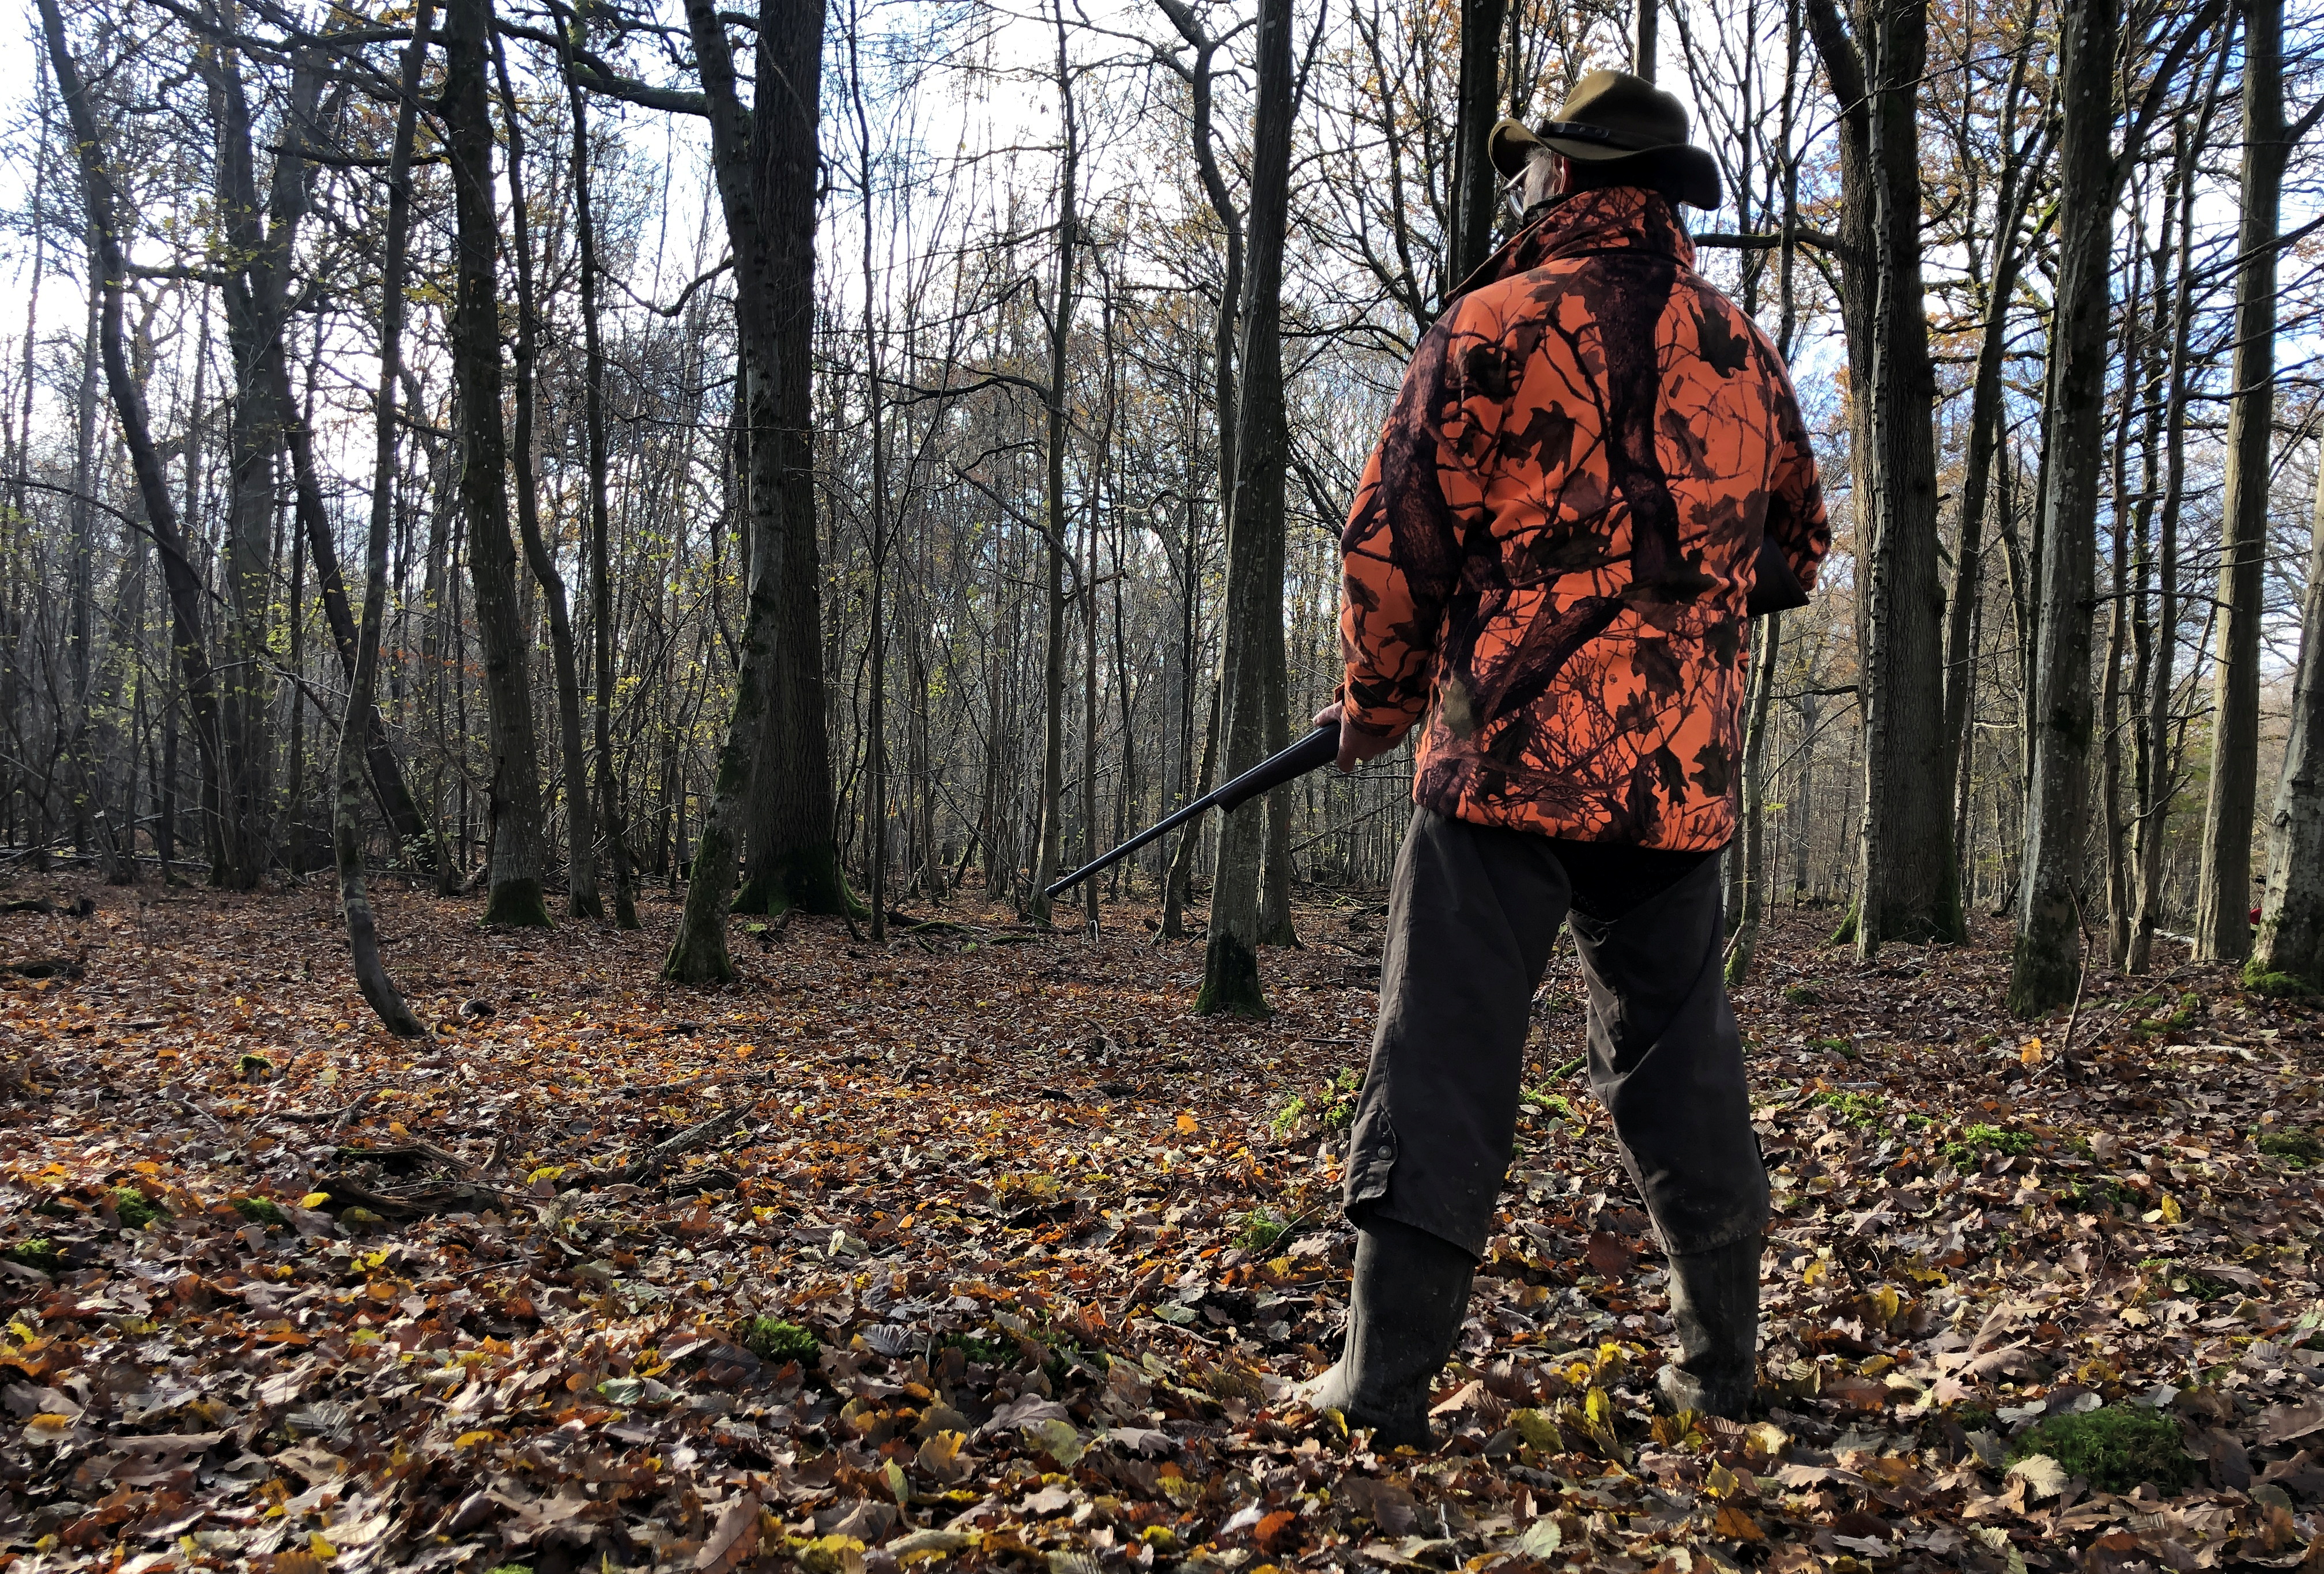 A hunter holds his shotgun during a hunting party at Ferrieres forest in Pontcarre, France, November 22, 2021. Picture taken November 22, 2021. REUTERS/Manuel Ausloos